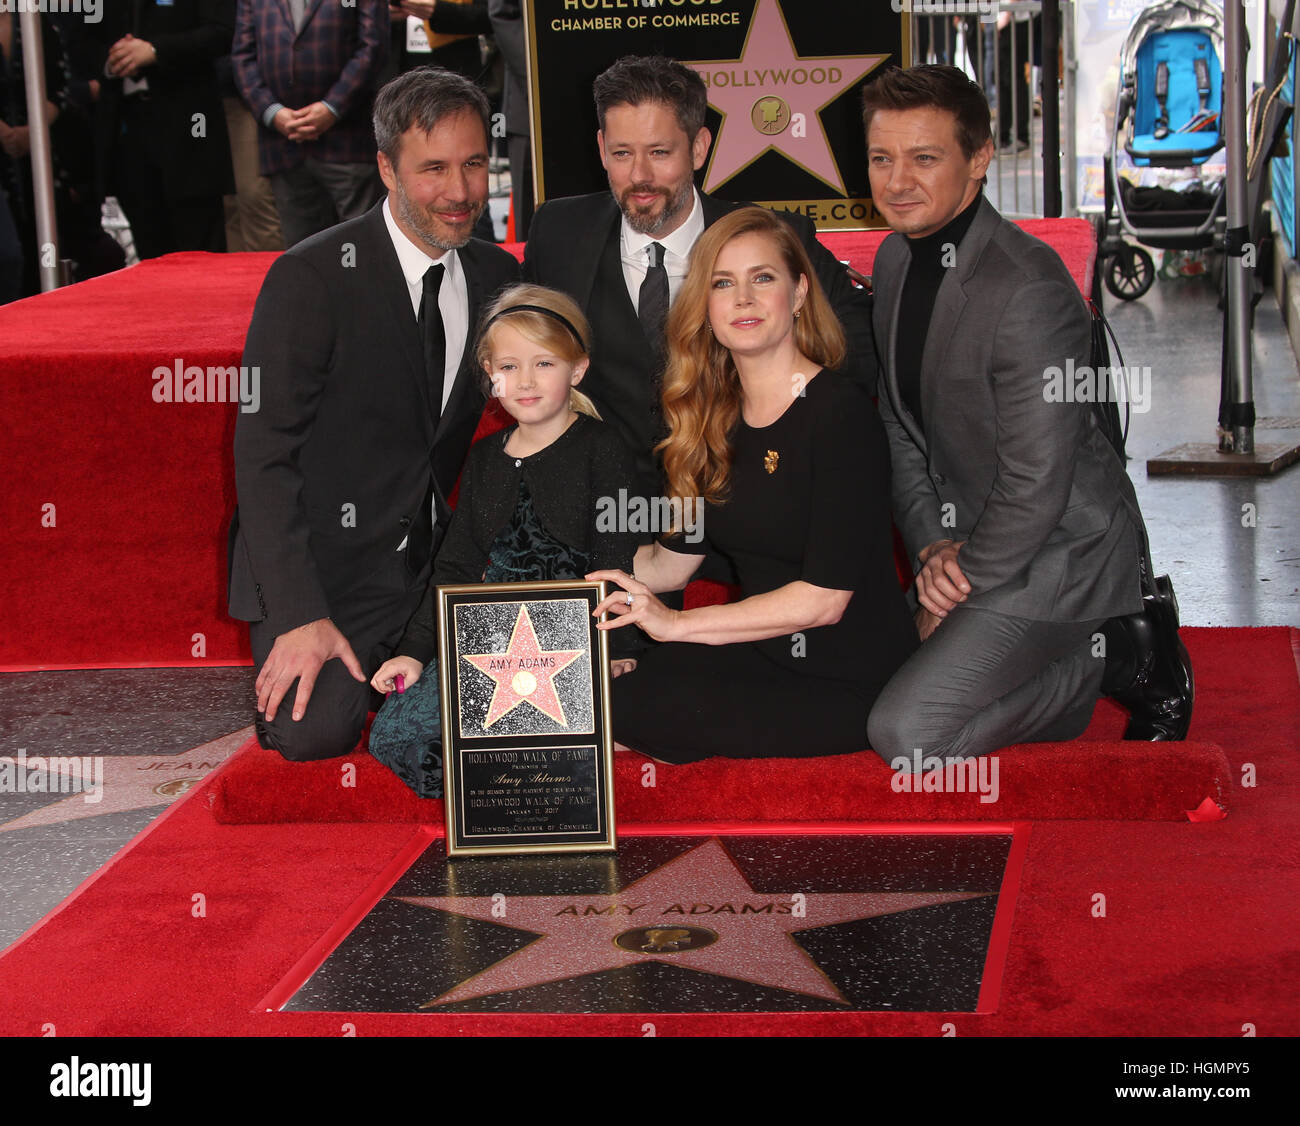 Hollywood, USA. 11th Jan, 2017. Actress Amy Adams with director Denis Villeneuve, Aviana Olea Le Gallo, Darren Le Gallo and actor Jeremy Renner honored on the Hollywood Walk of Fame.  in Hollywood, California. © Faye Sadou/Media Punch/Alamy Live News Stock Photo